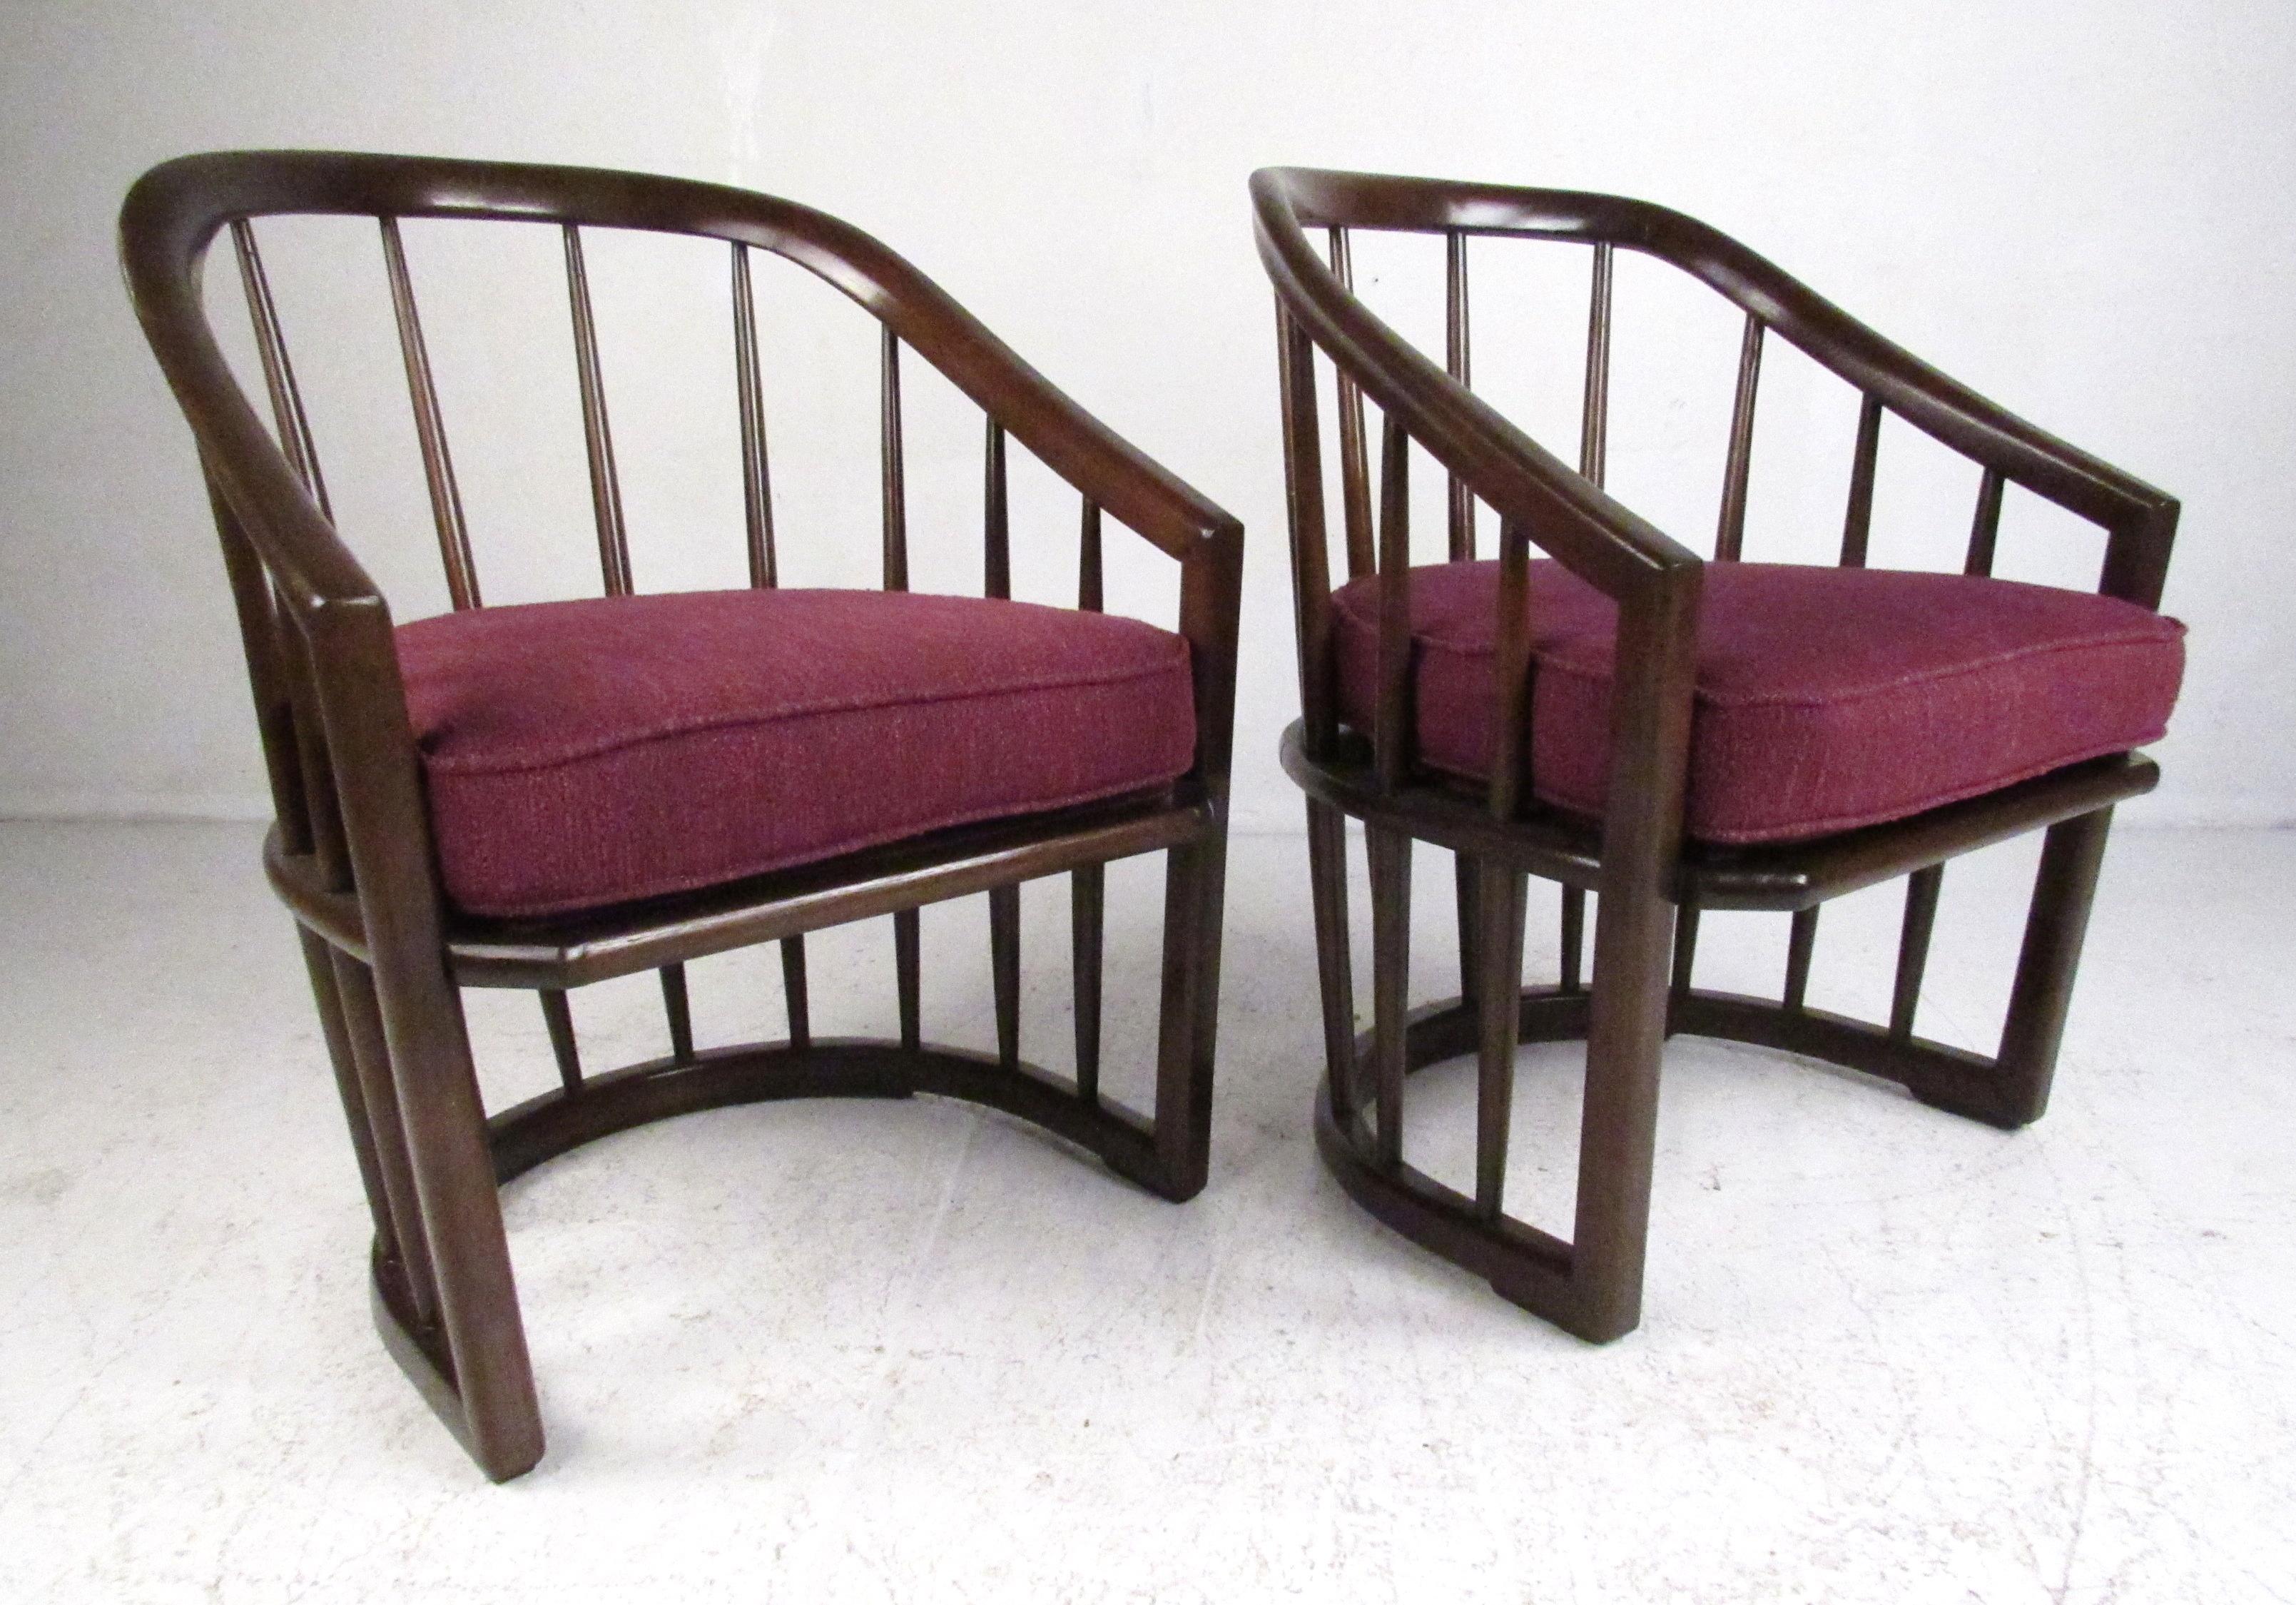 Recently restored pair of vintage walnut framed barrel back chairs with grape colored upholstery. Please confirm item location (NY or NJ) with dealer.